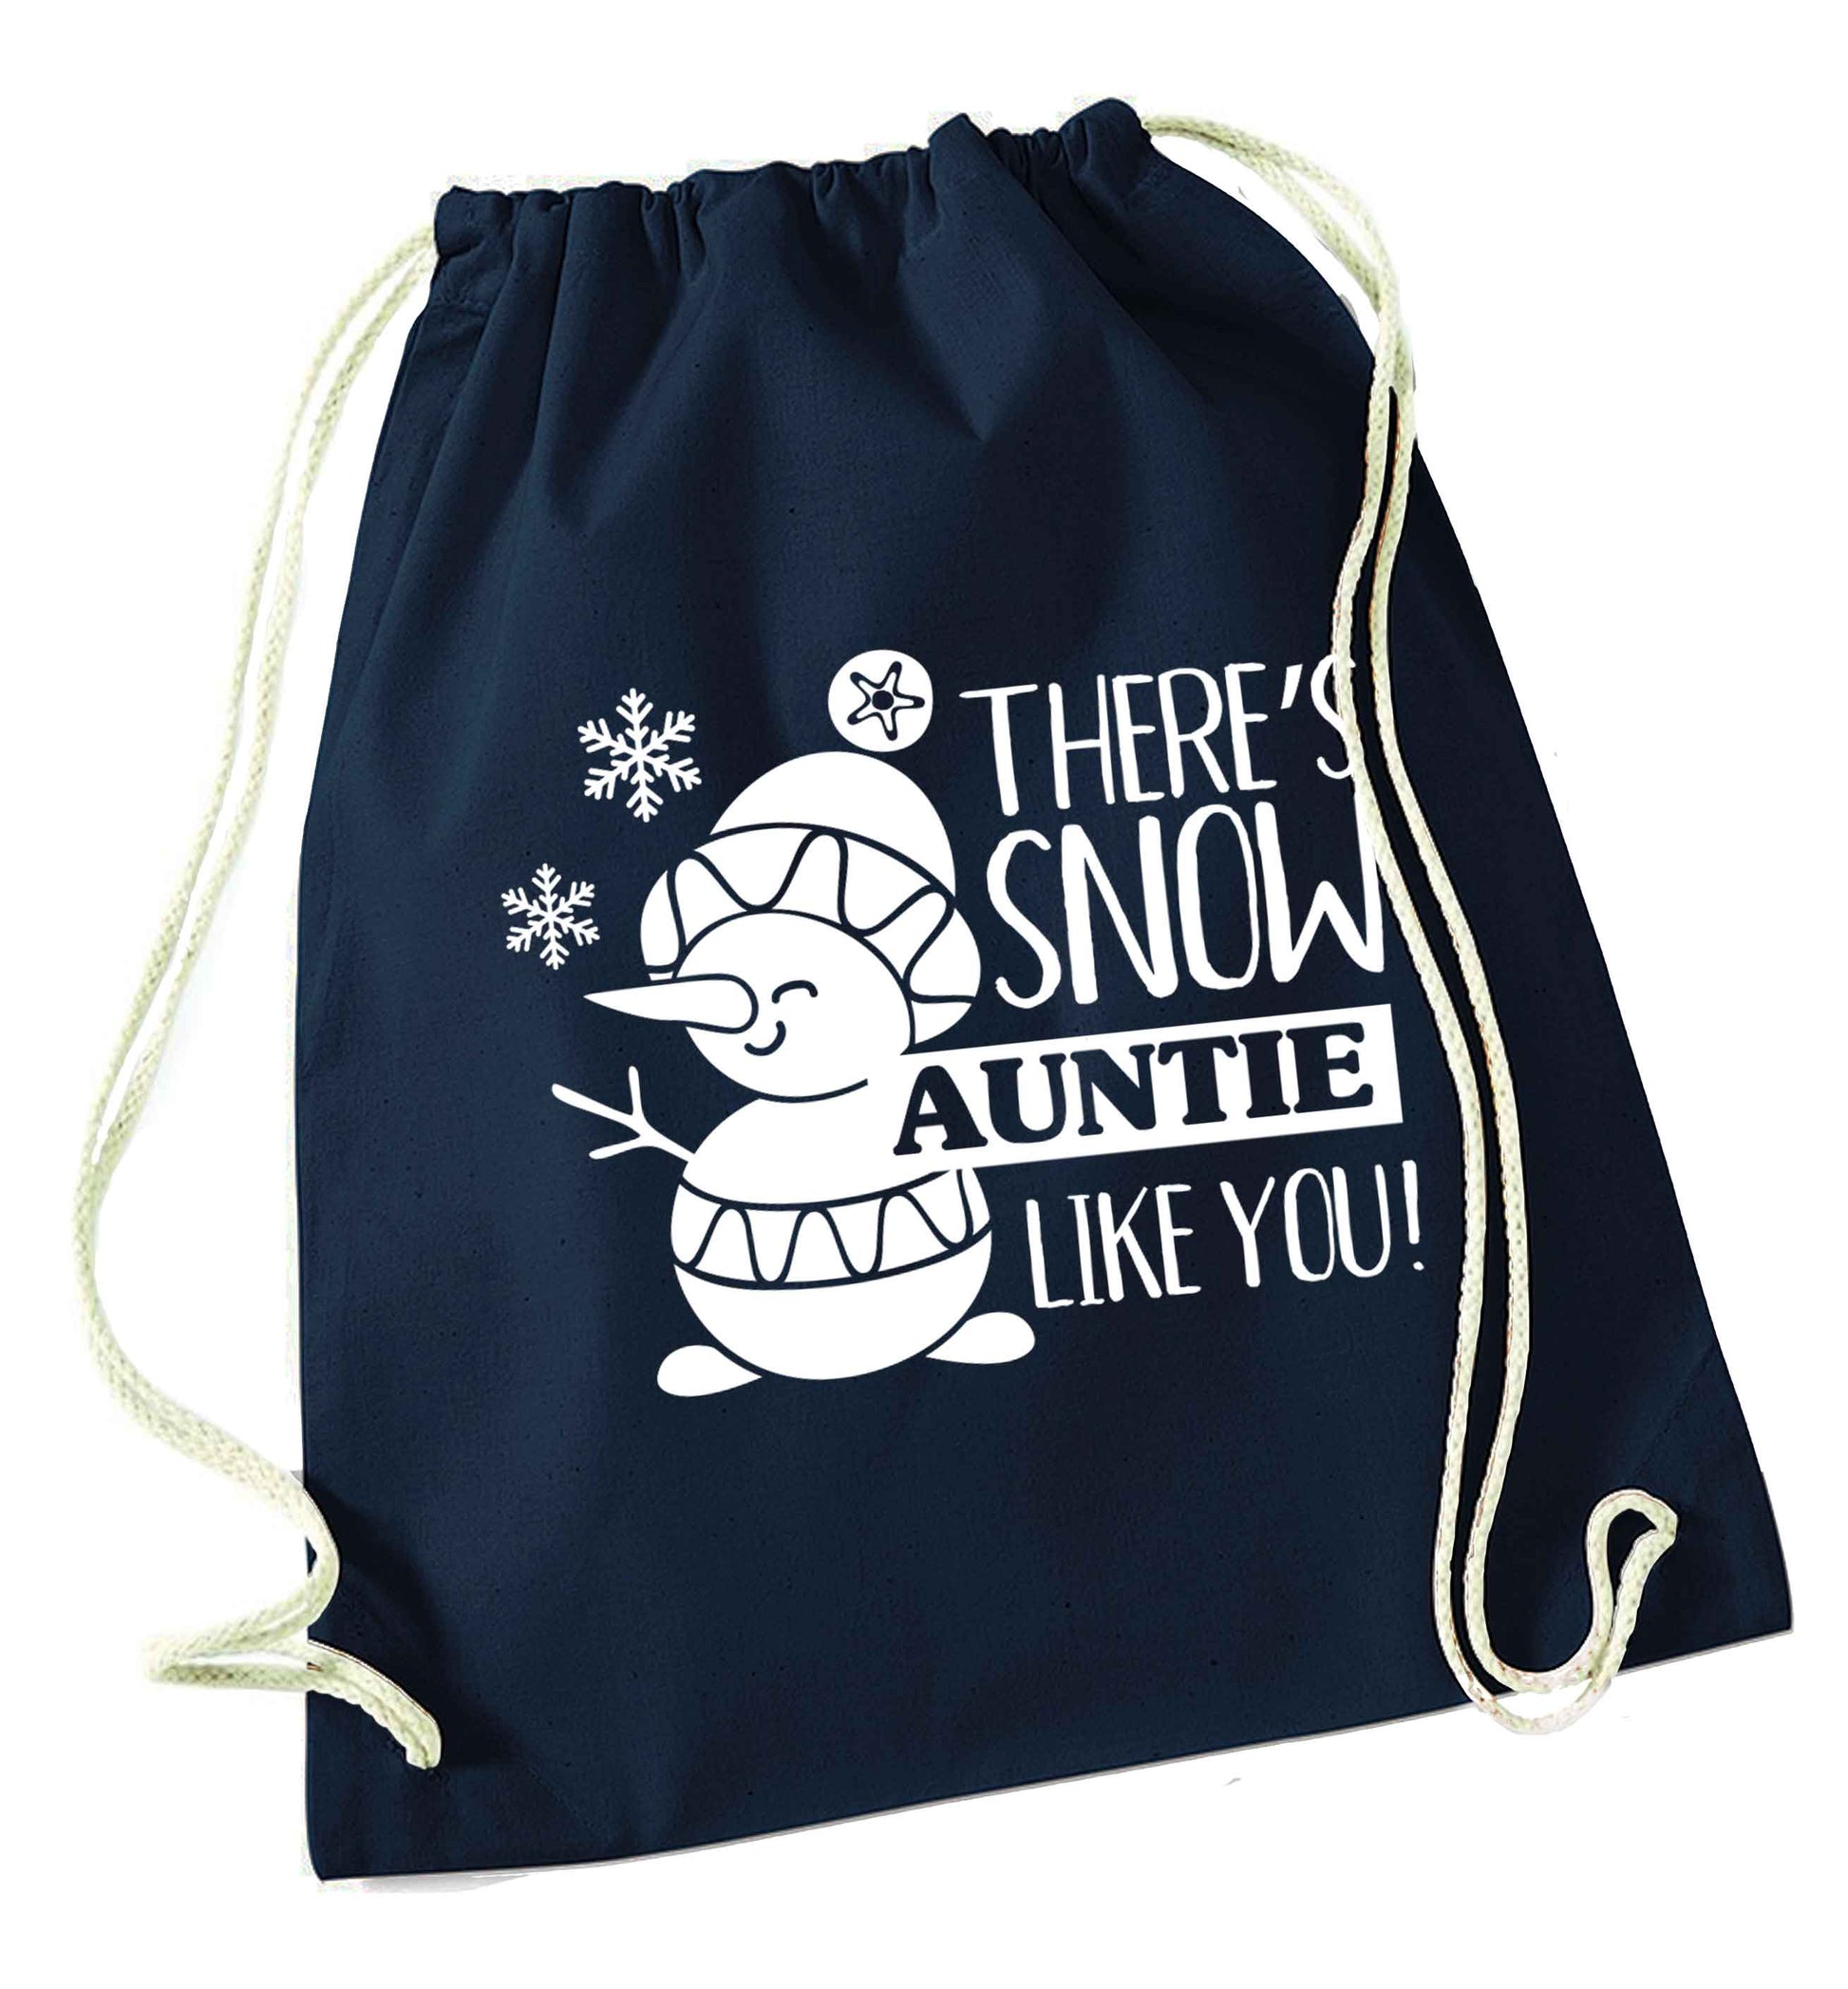 There's snow auntie like you navy drawstring bag